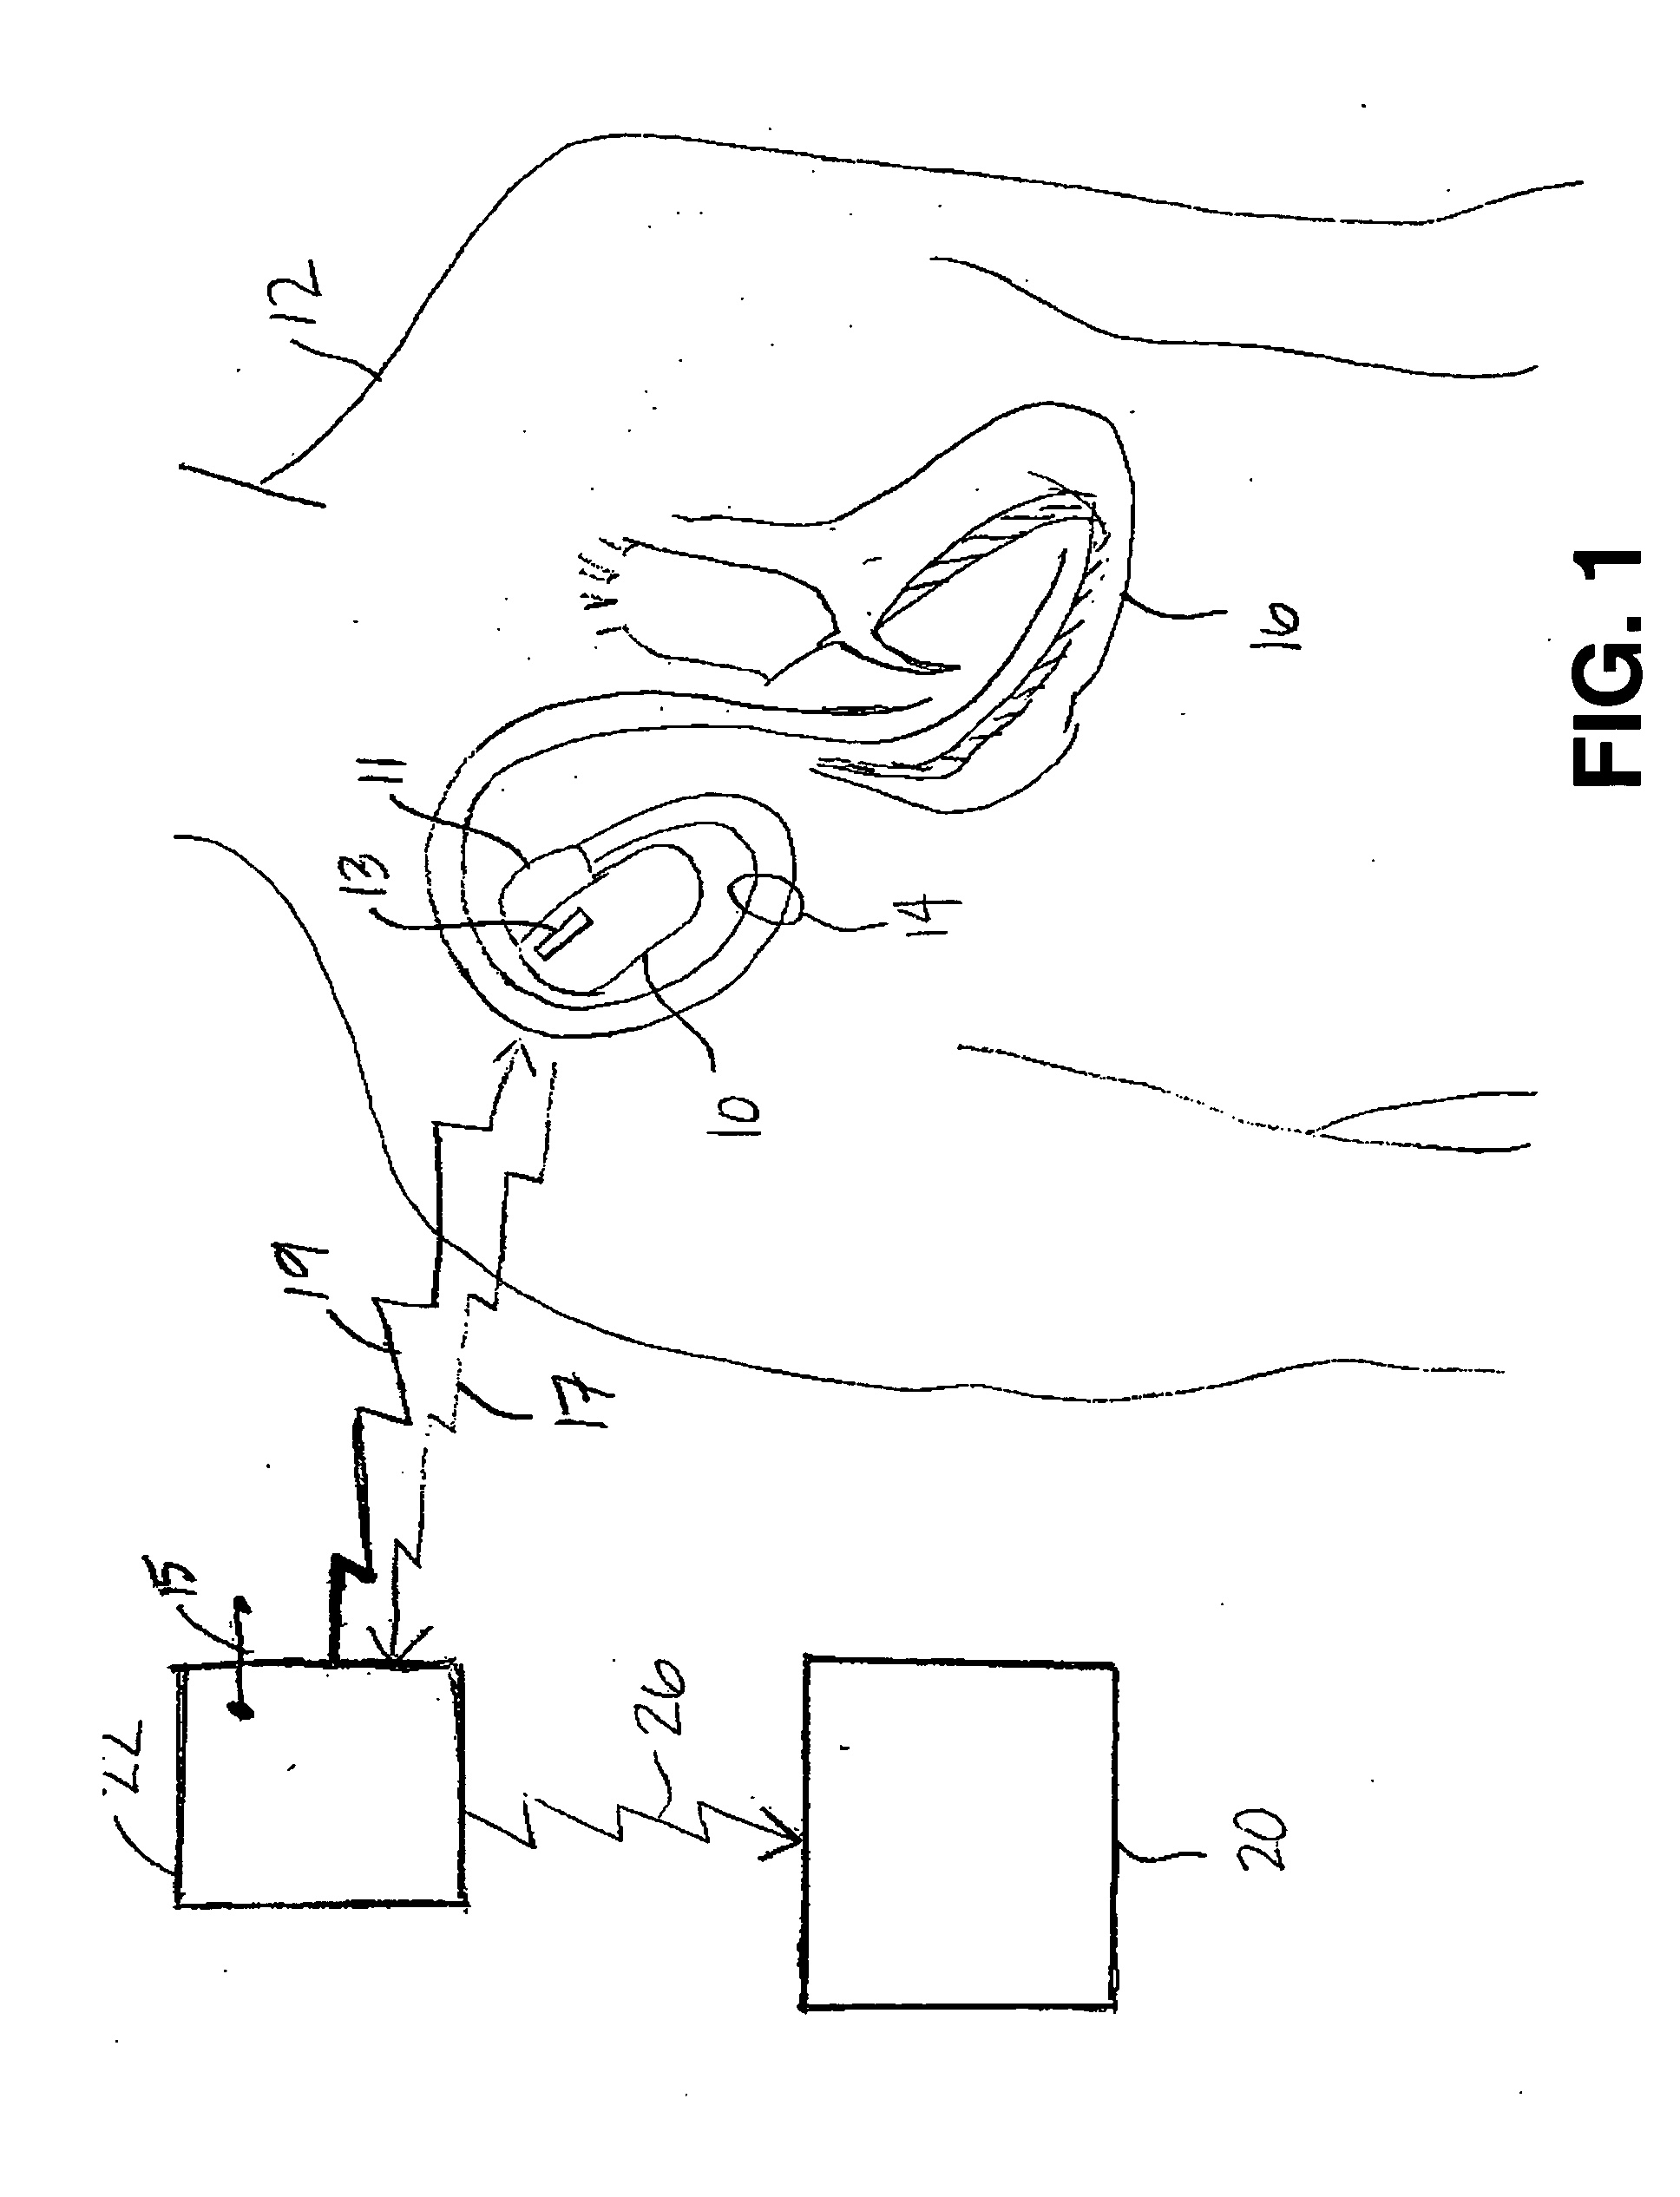 Implantable medical device system with communication link to home appliances